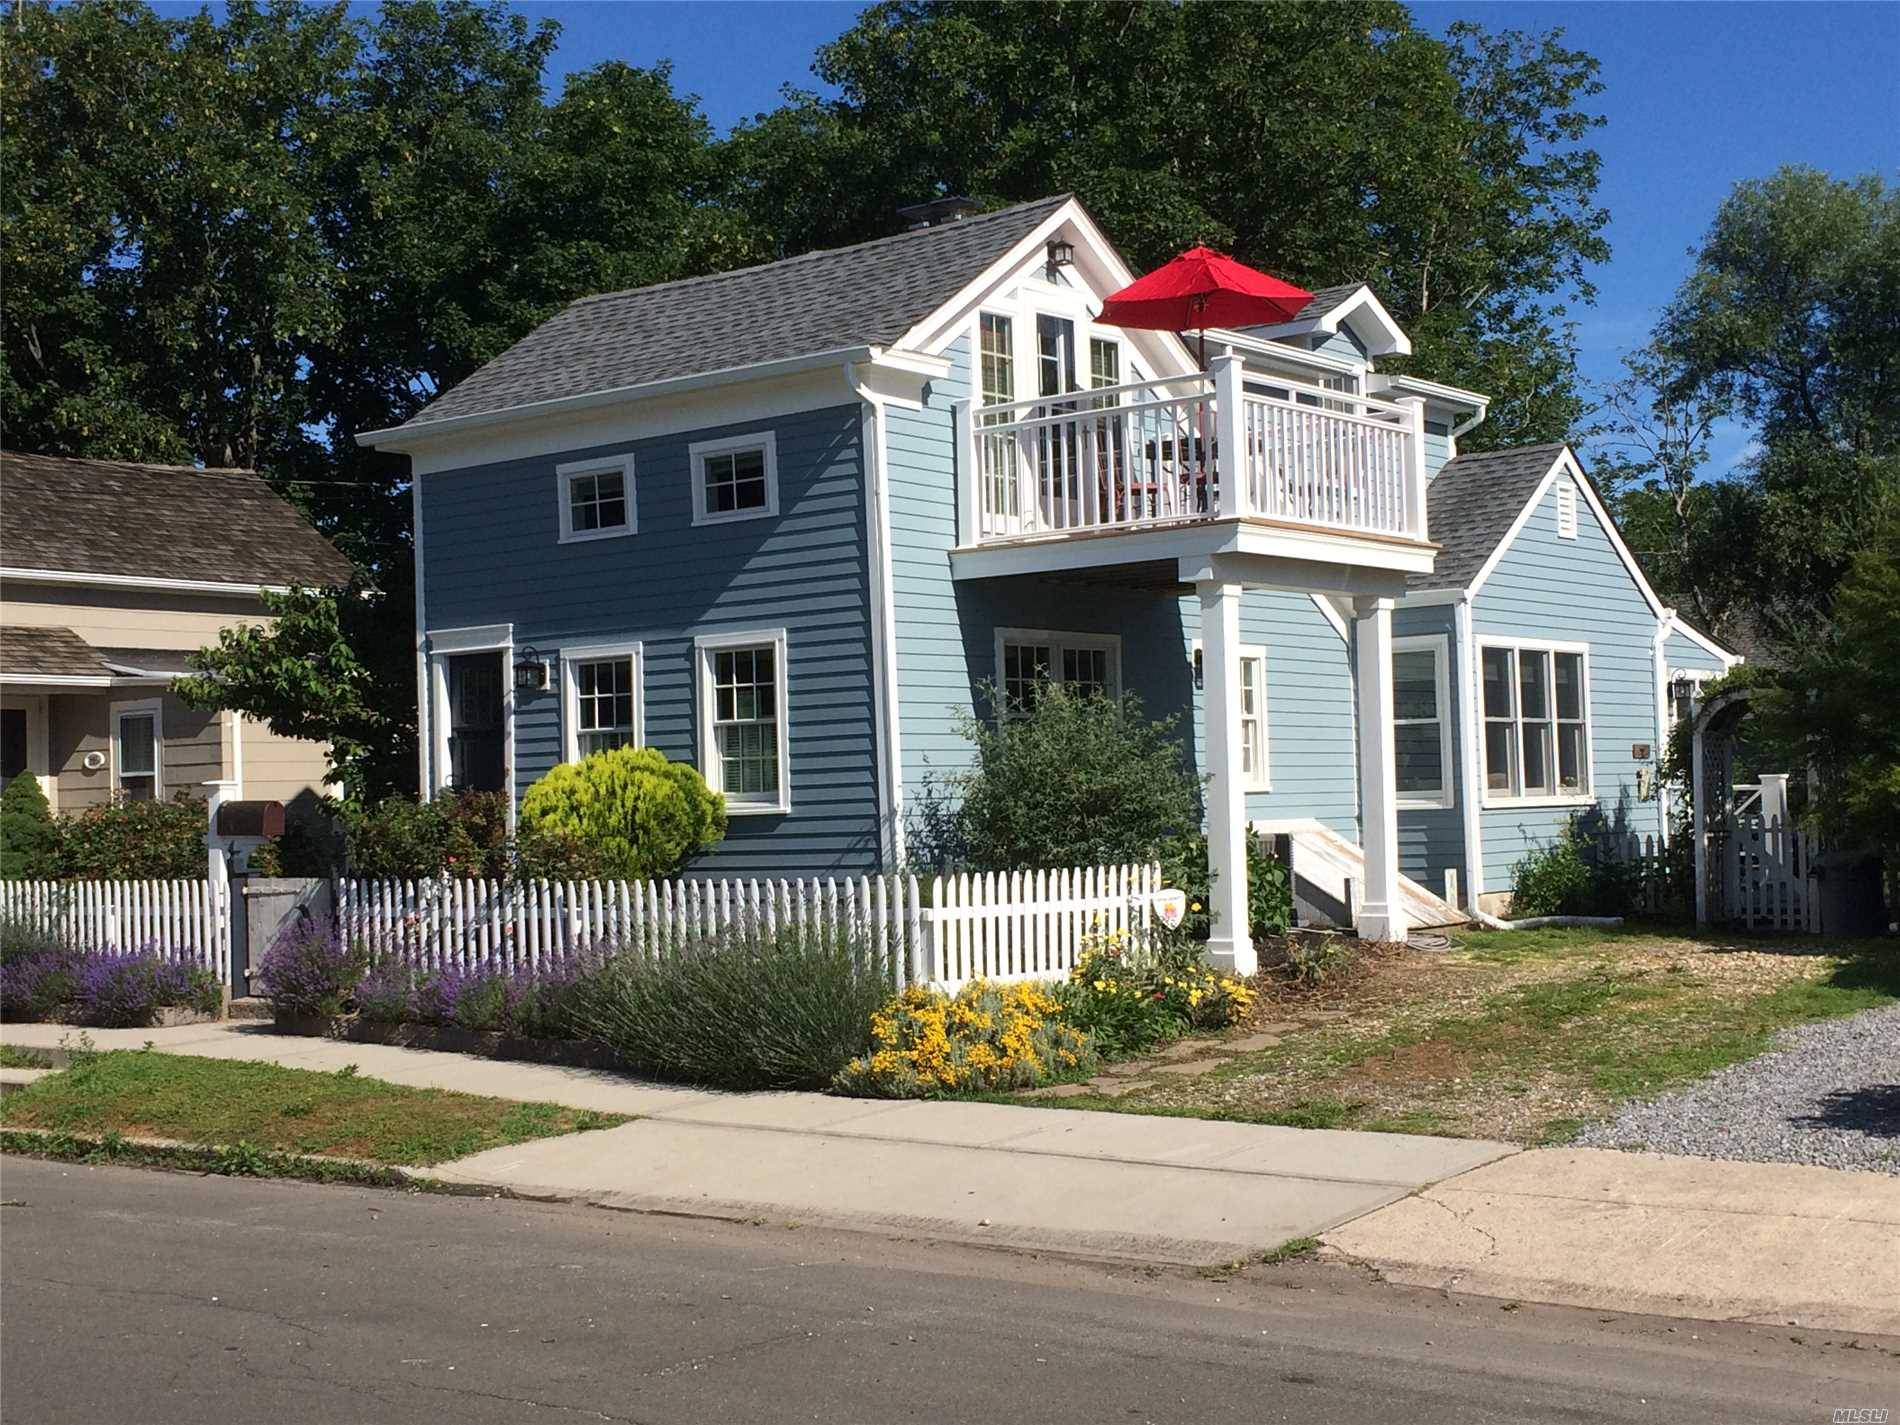 Beautifully Renovated Gem In The Heart Of Greenport's Maritime District-Across The Street From The Boardwalk!